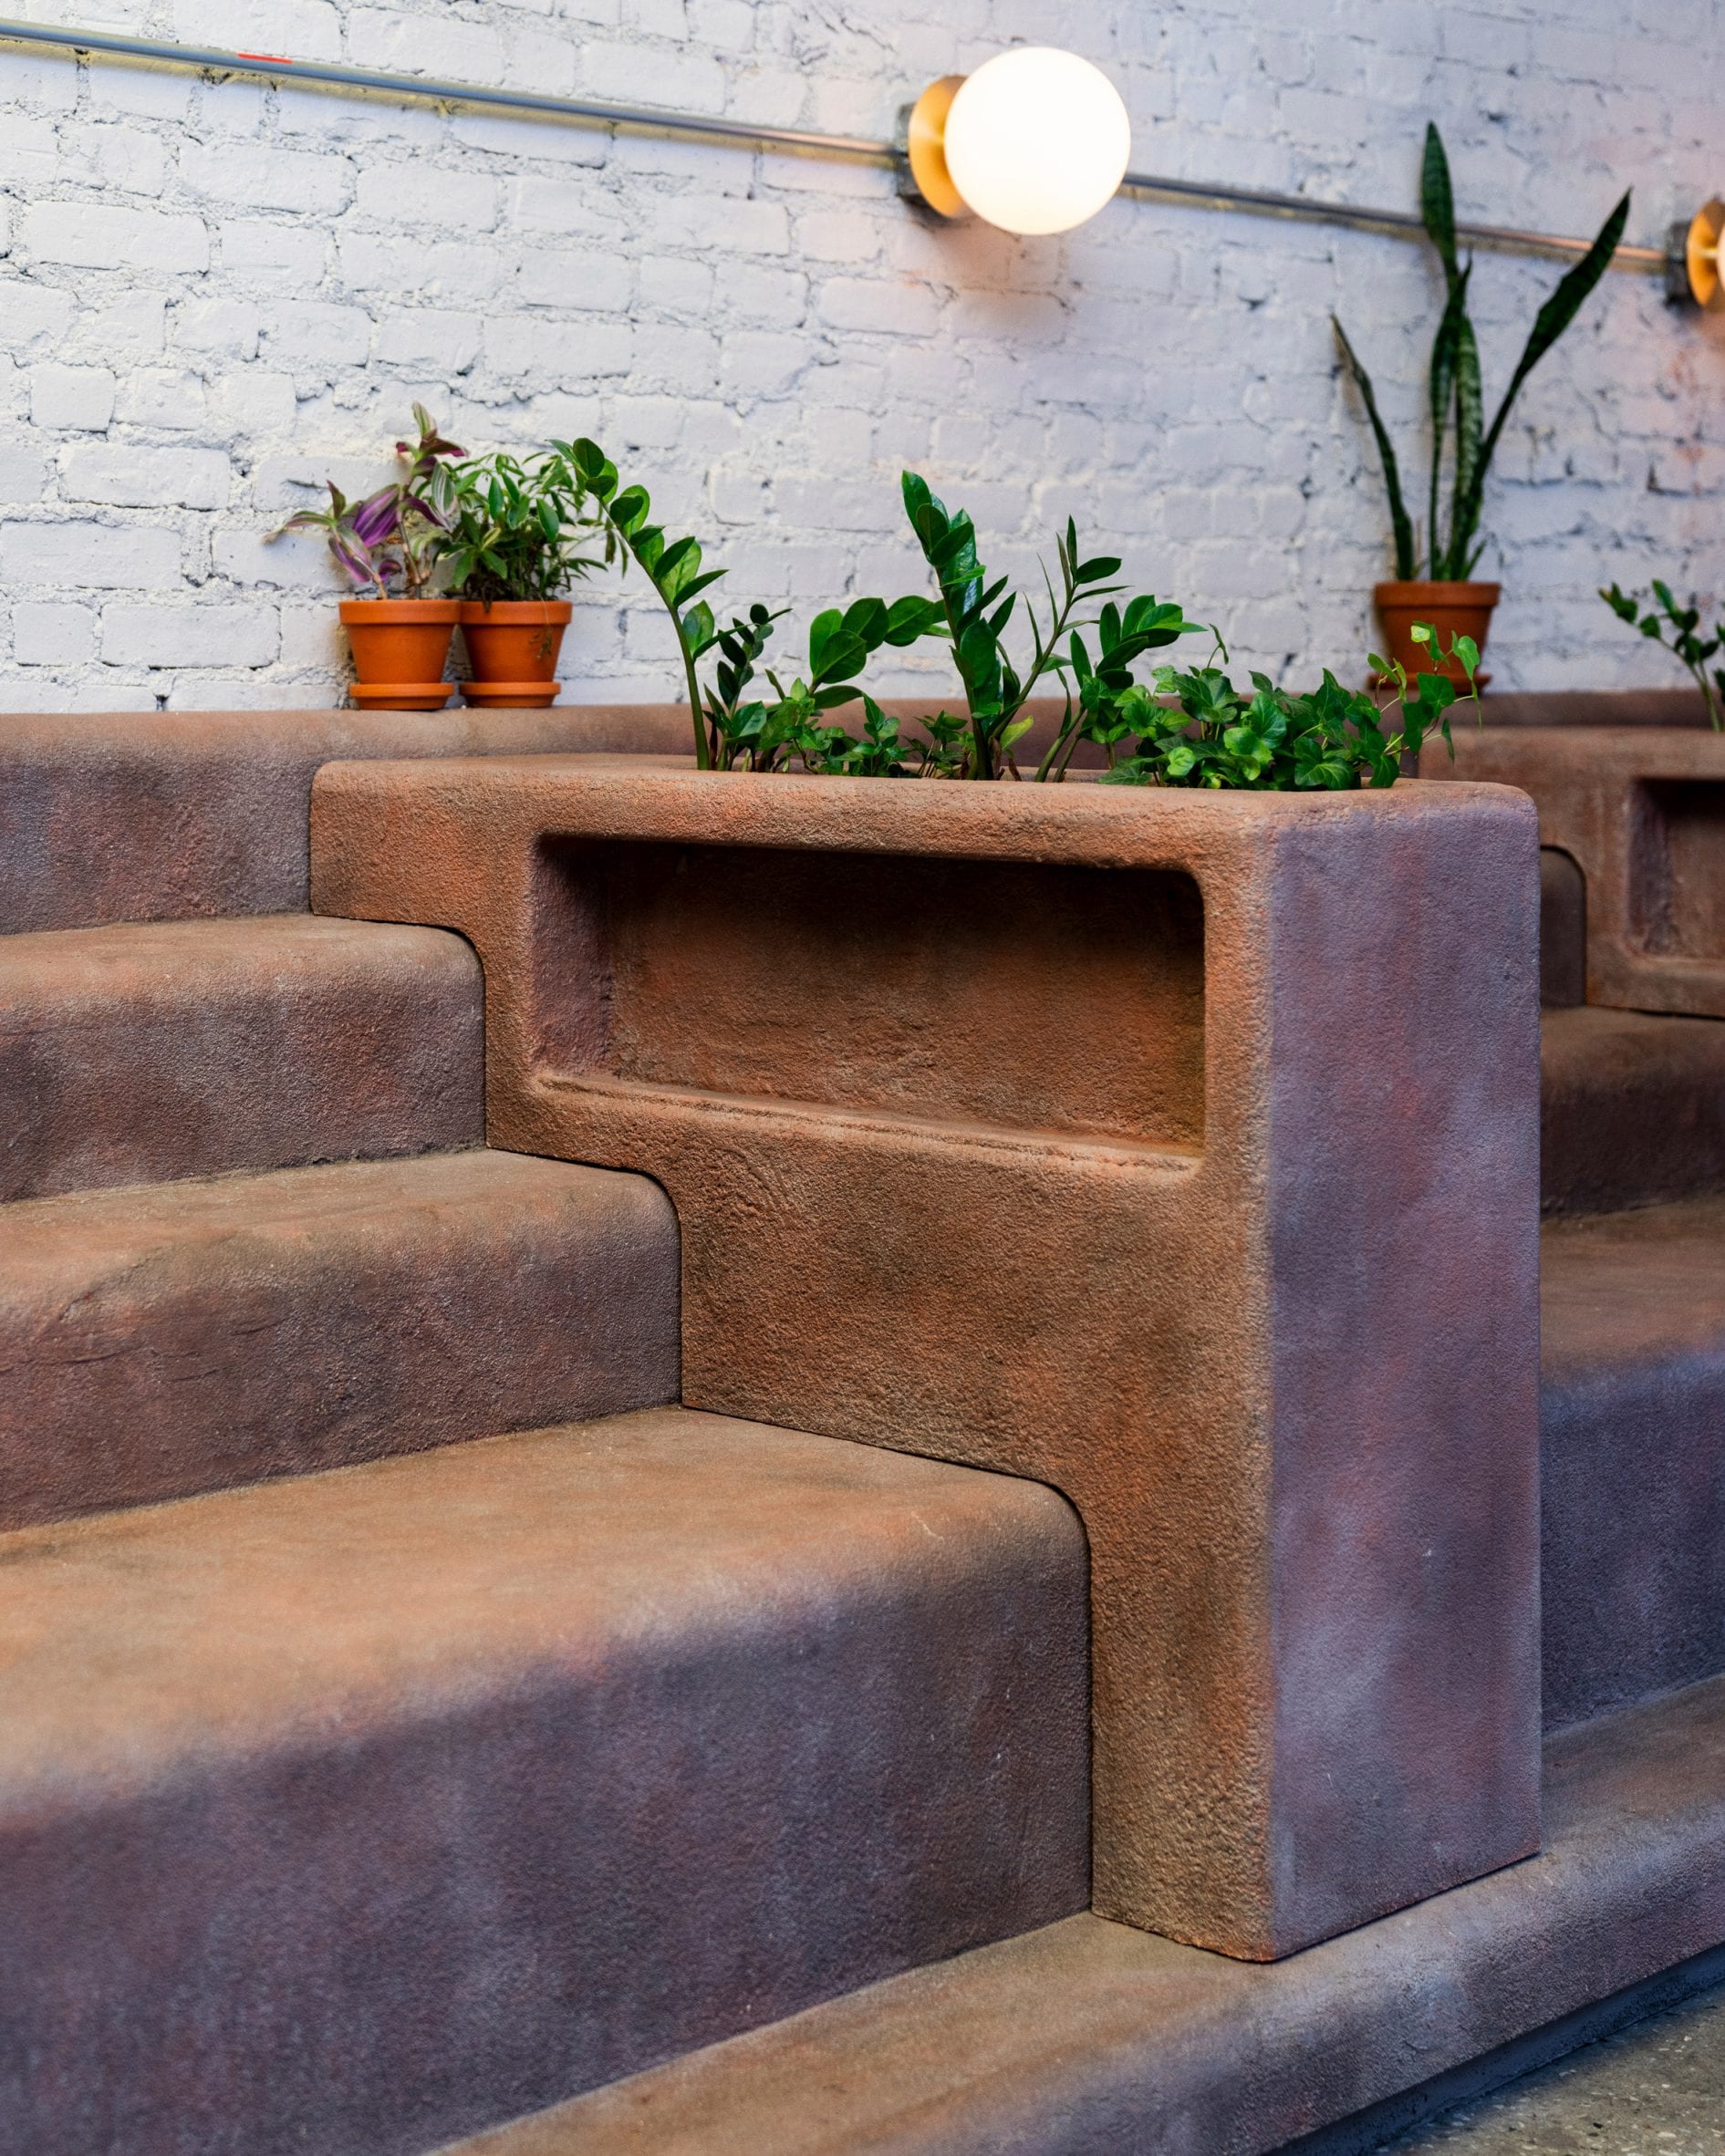 Planters sit between the stooped seating in Daughter